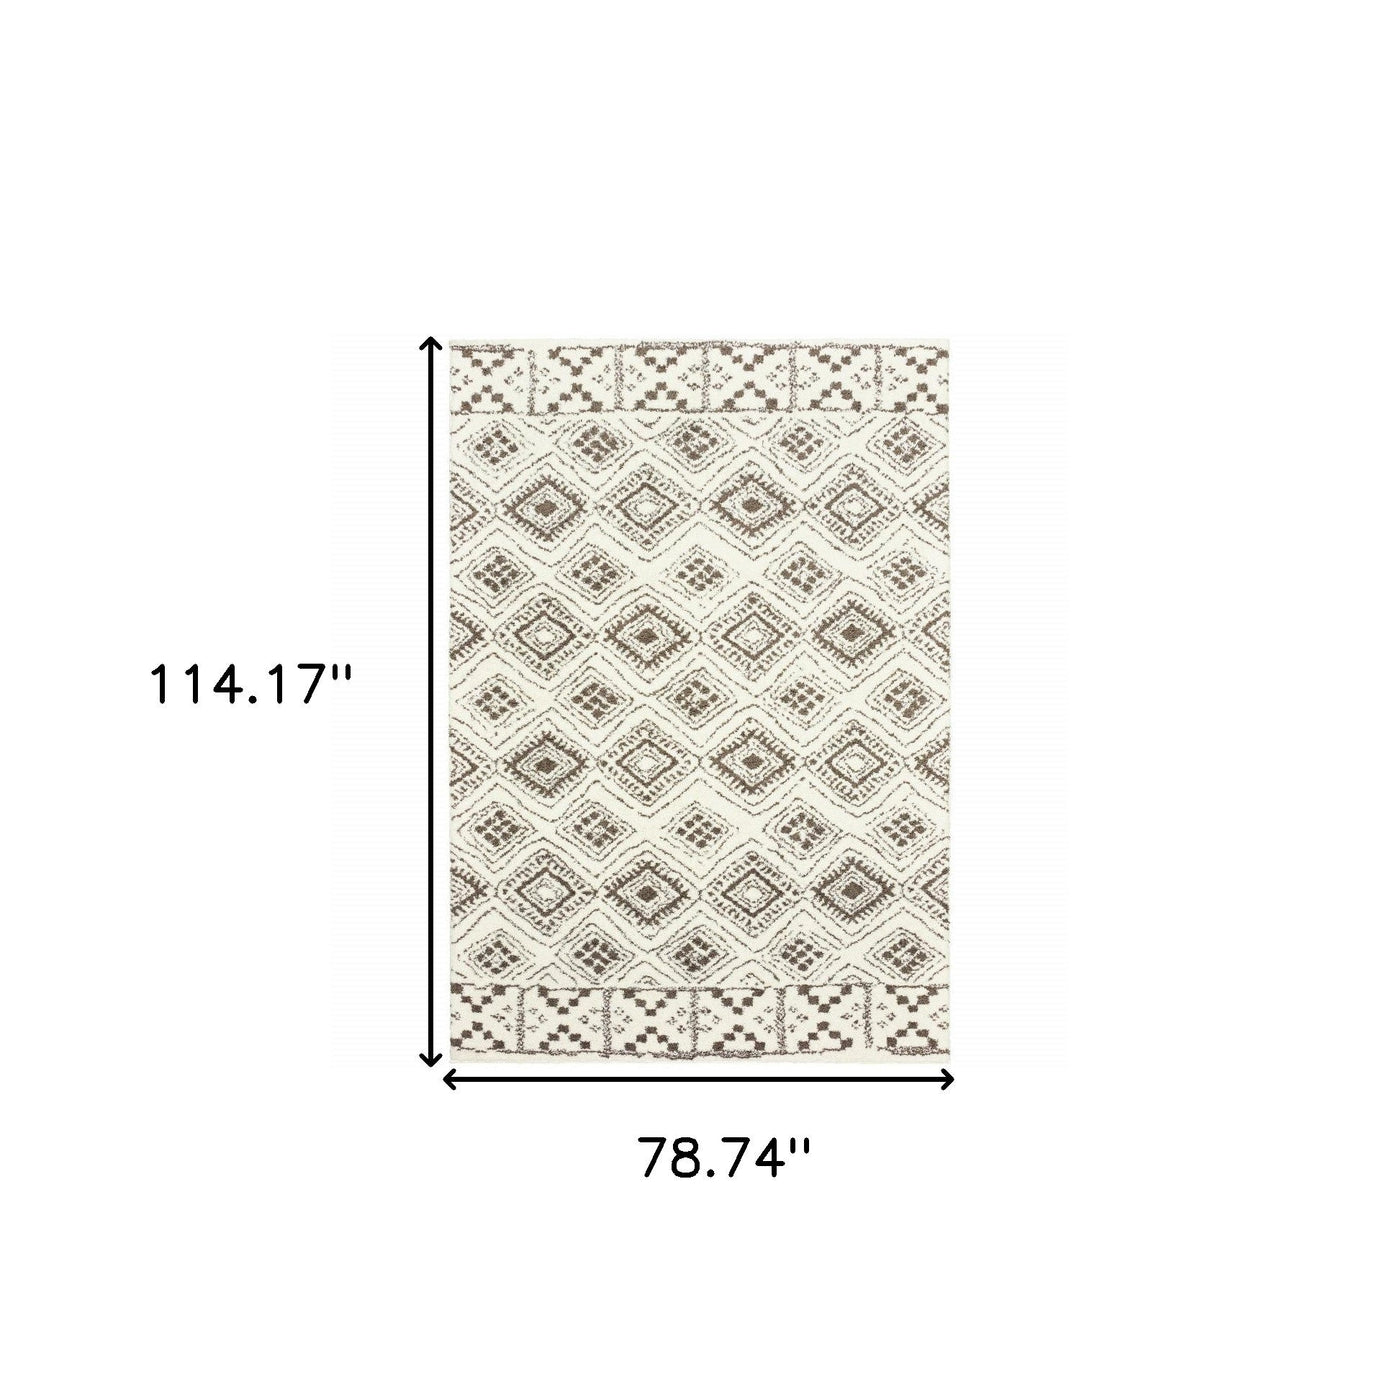 6’ X 9’ Ivory And Brown Geometric Shag Power Loom Stain Resistant Area Rug - Area Rugs